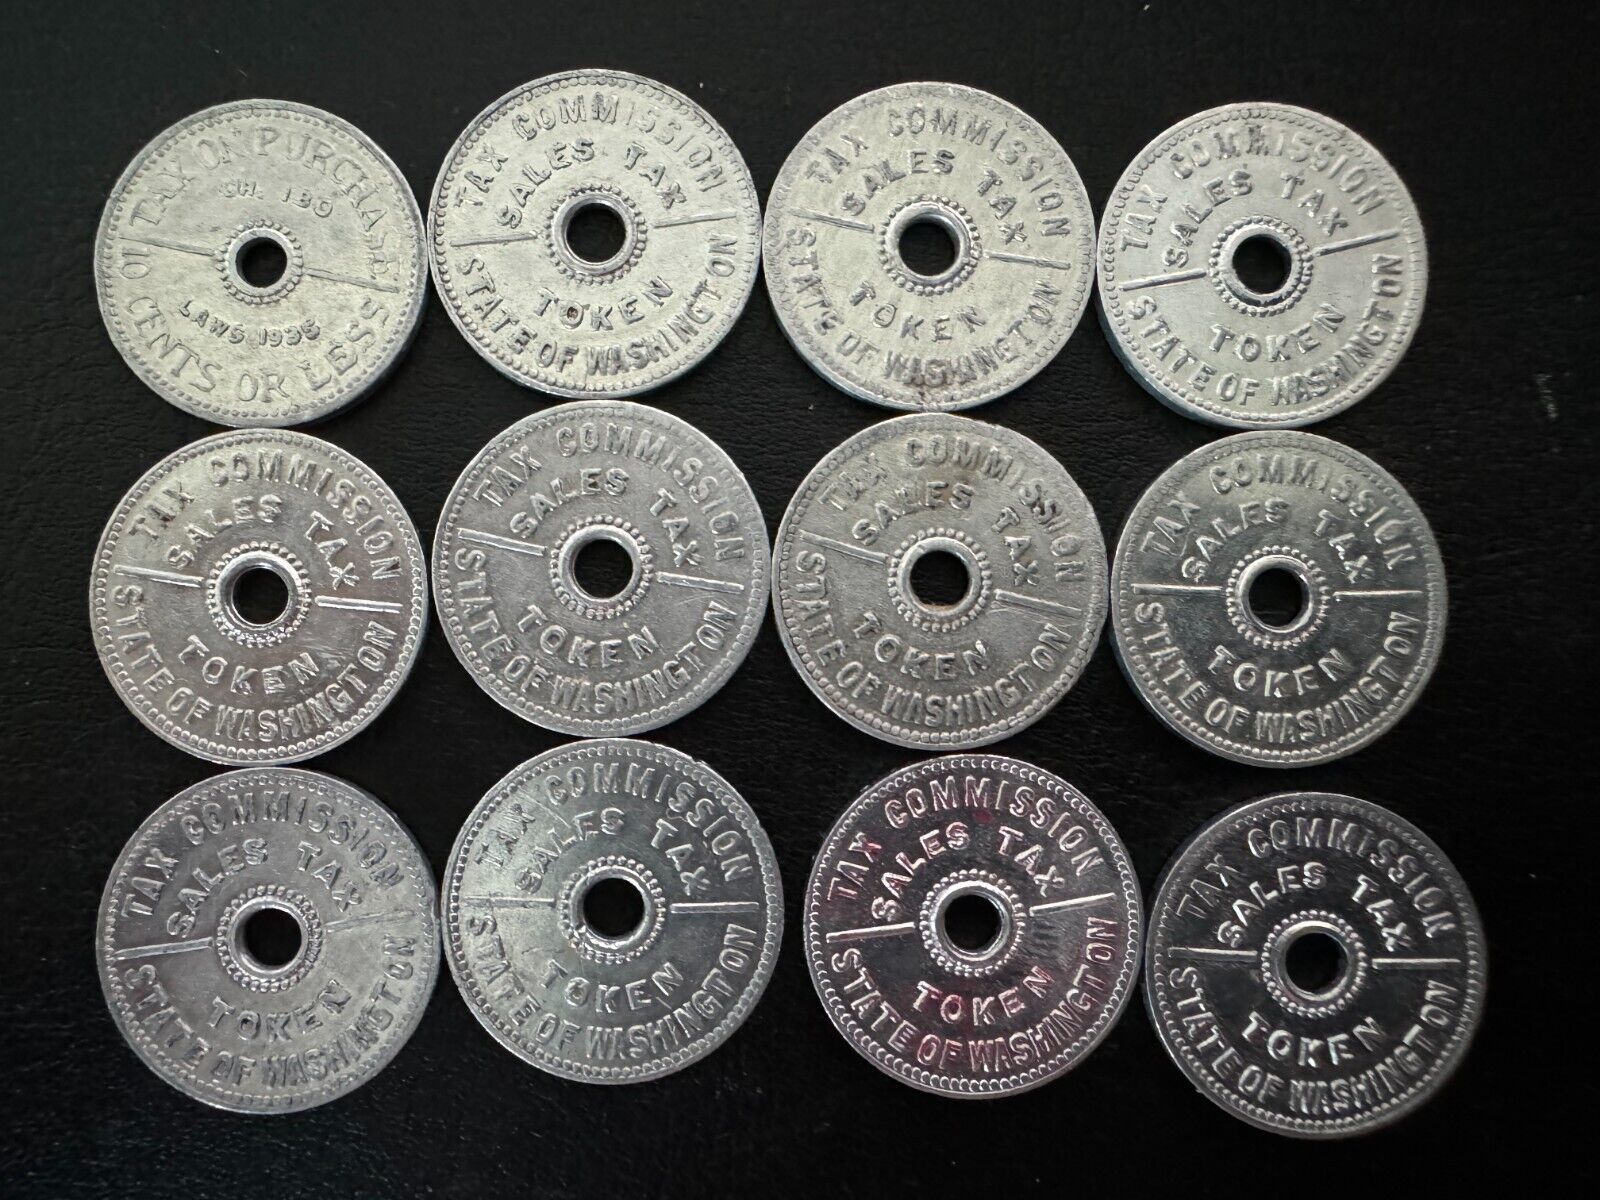 Lot Of 12 State Of Washington Sales Tax Commission Tokens  1930s 1940s